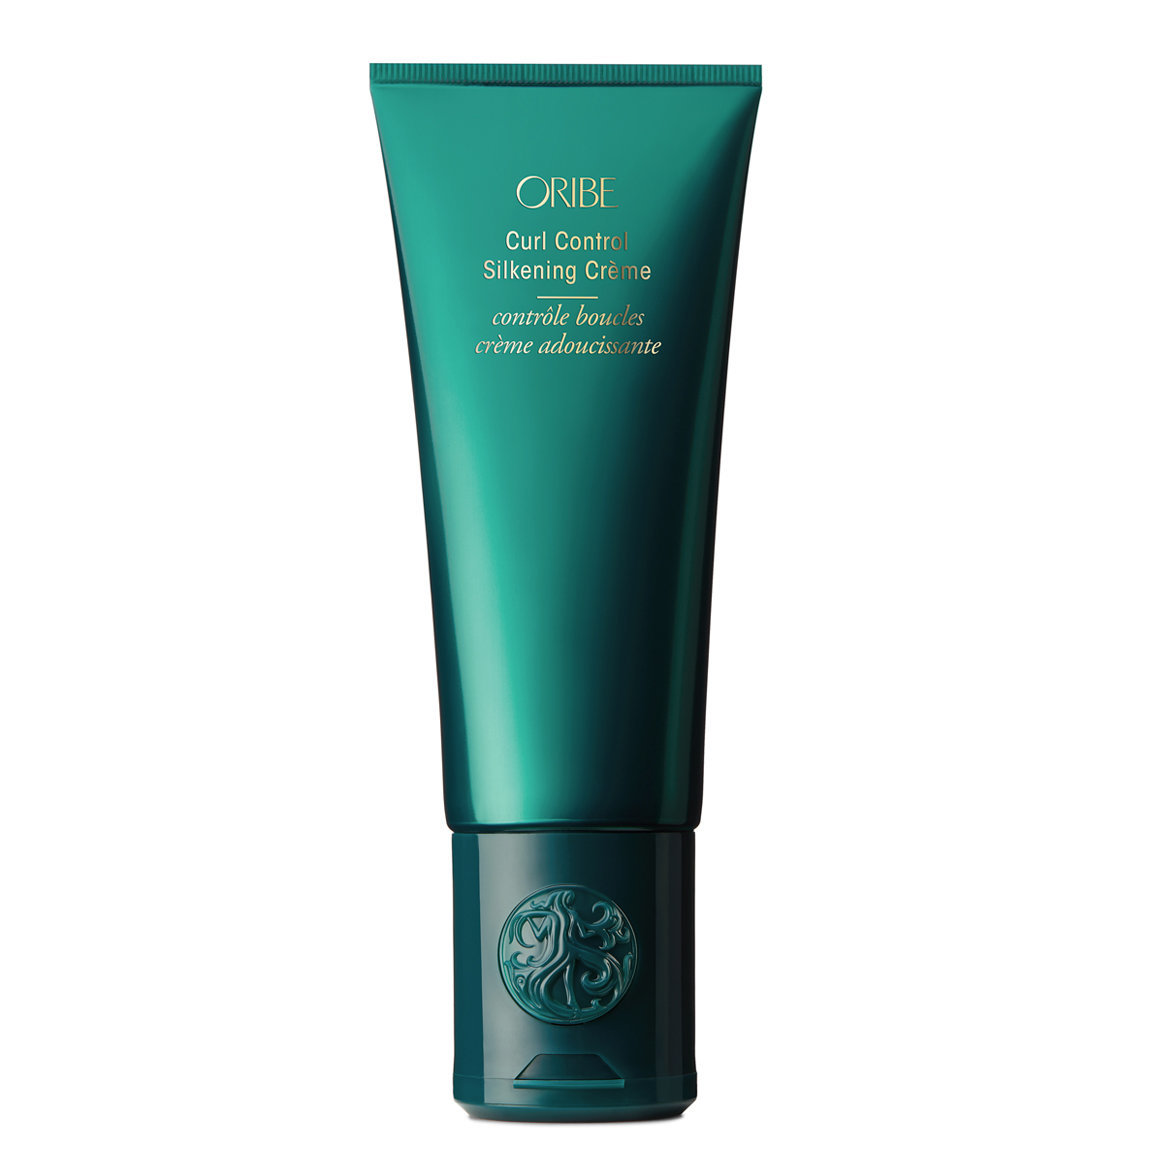 Oribe Curl Control Silkening Crème alternative view 1 - product swatch.